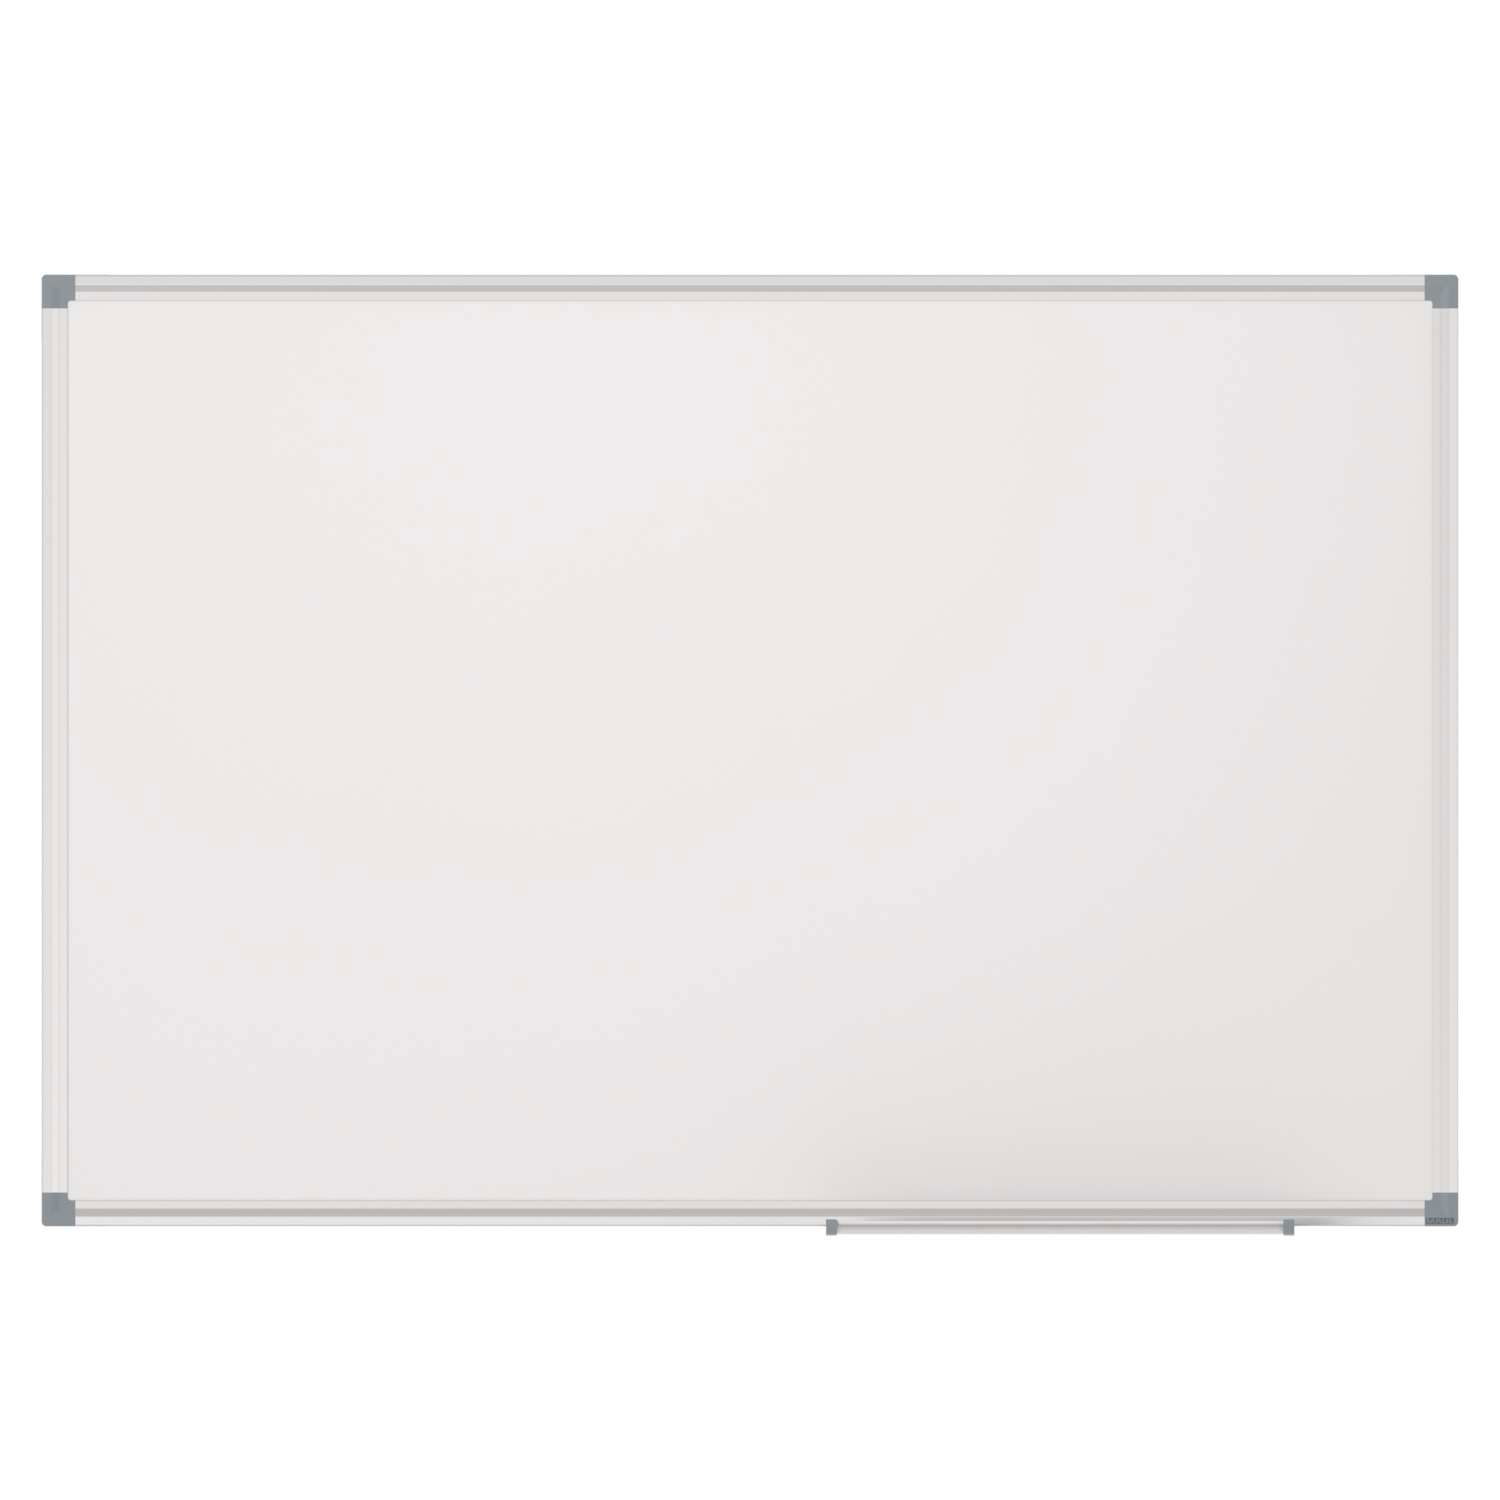 Whiteboard MAULstandard, Emaille, 120x300 cm